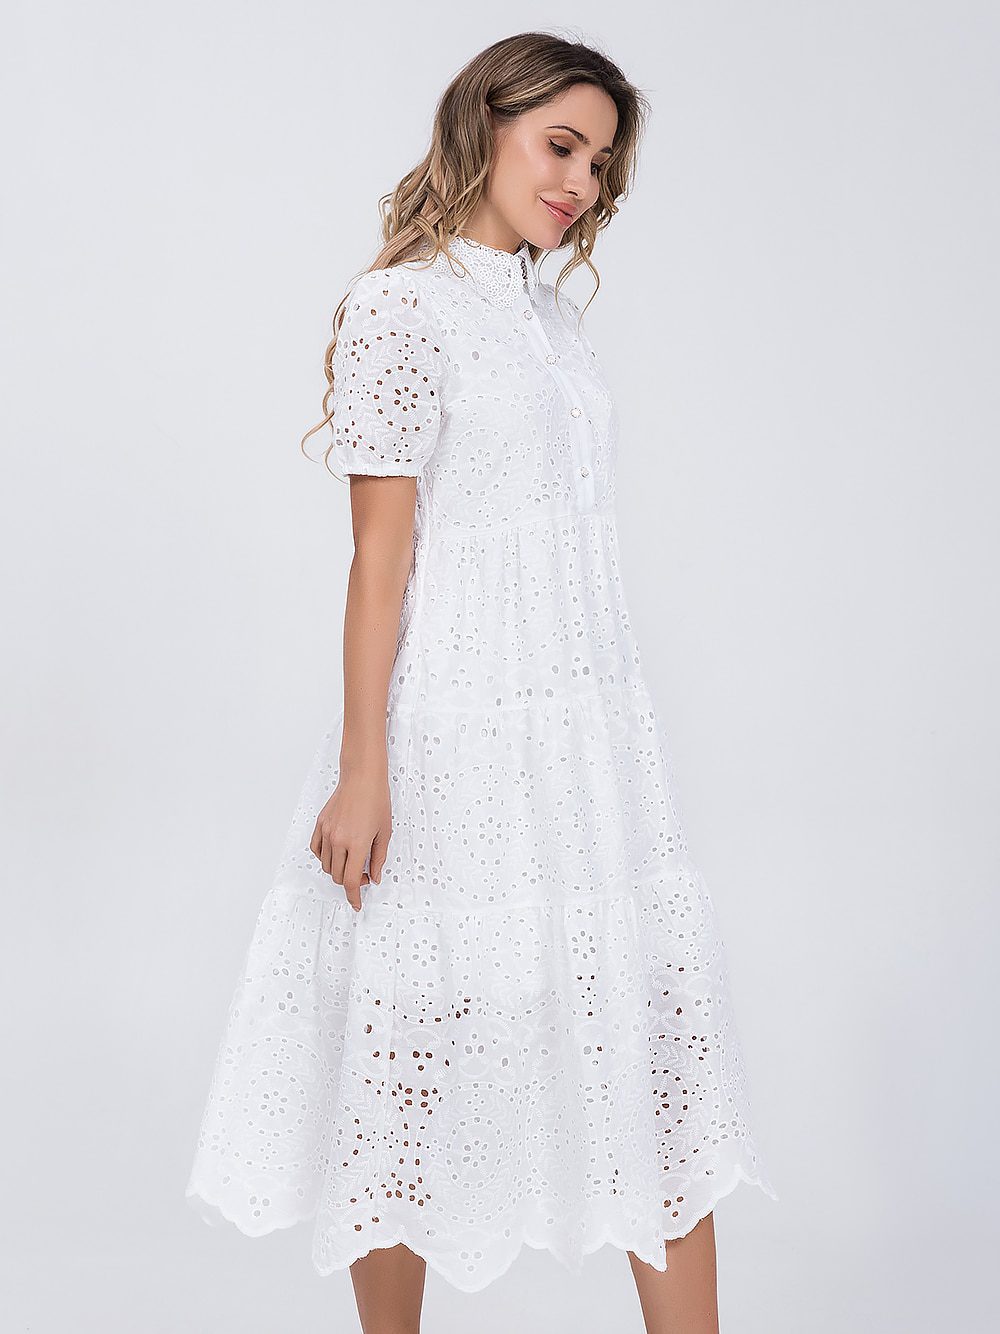 Cotton Hollow Out High Waist Ruffled A-Line White Dress in Dresses